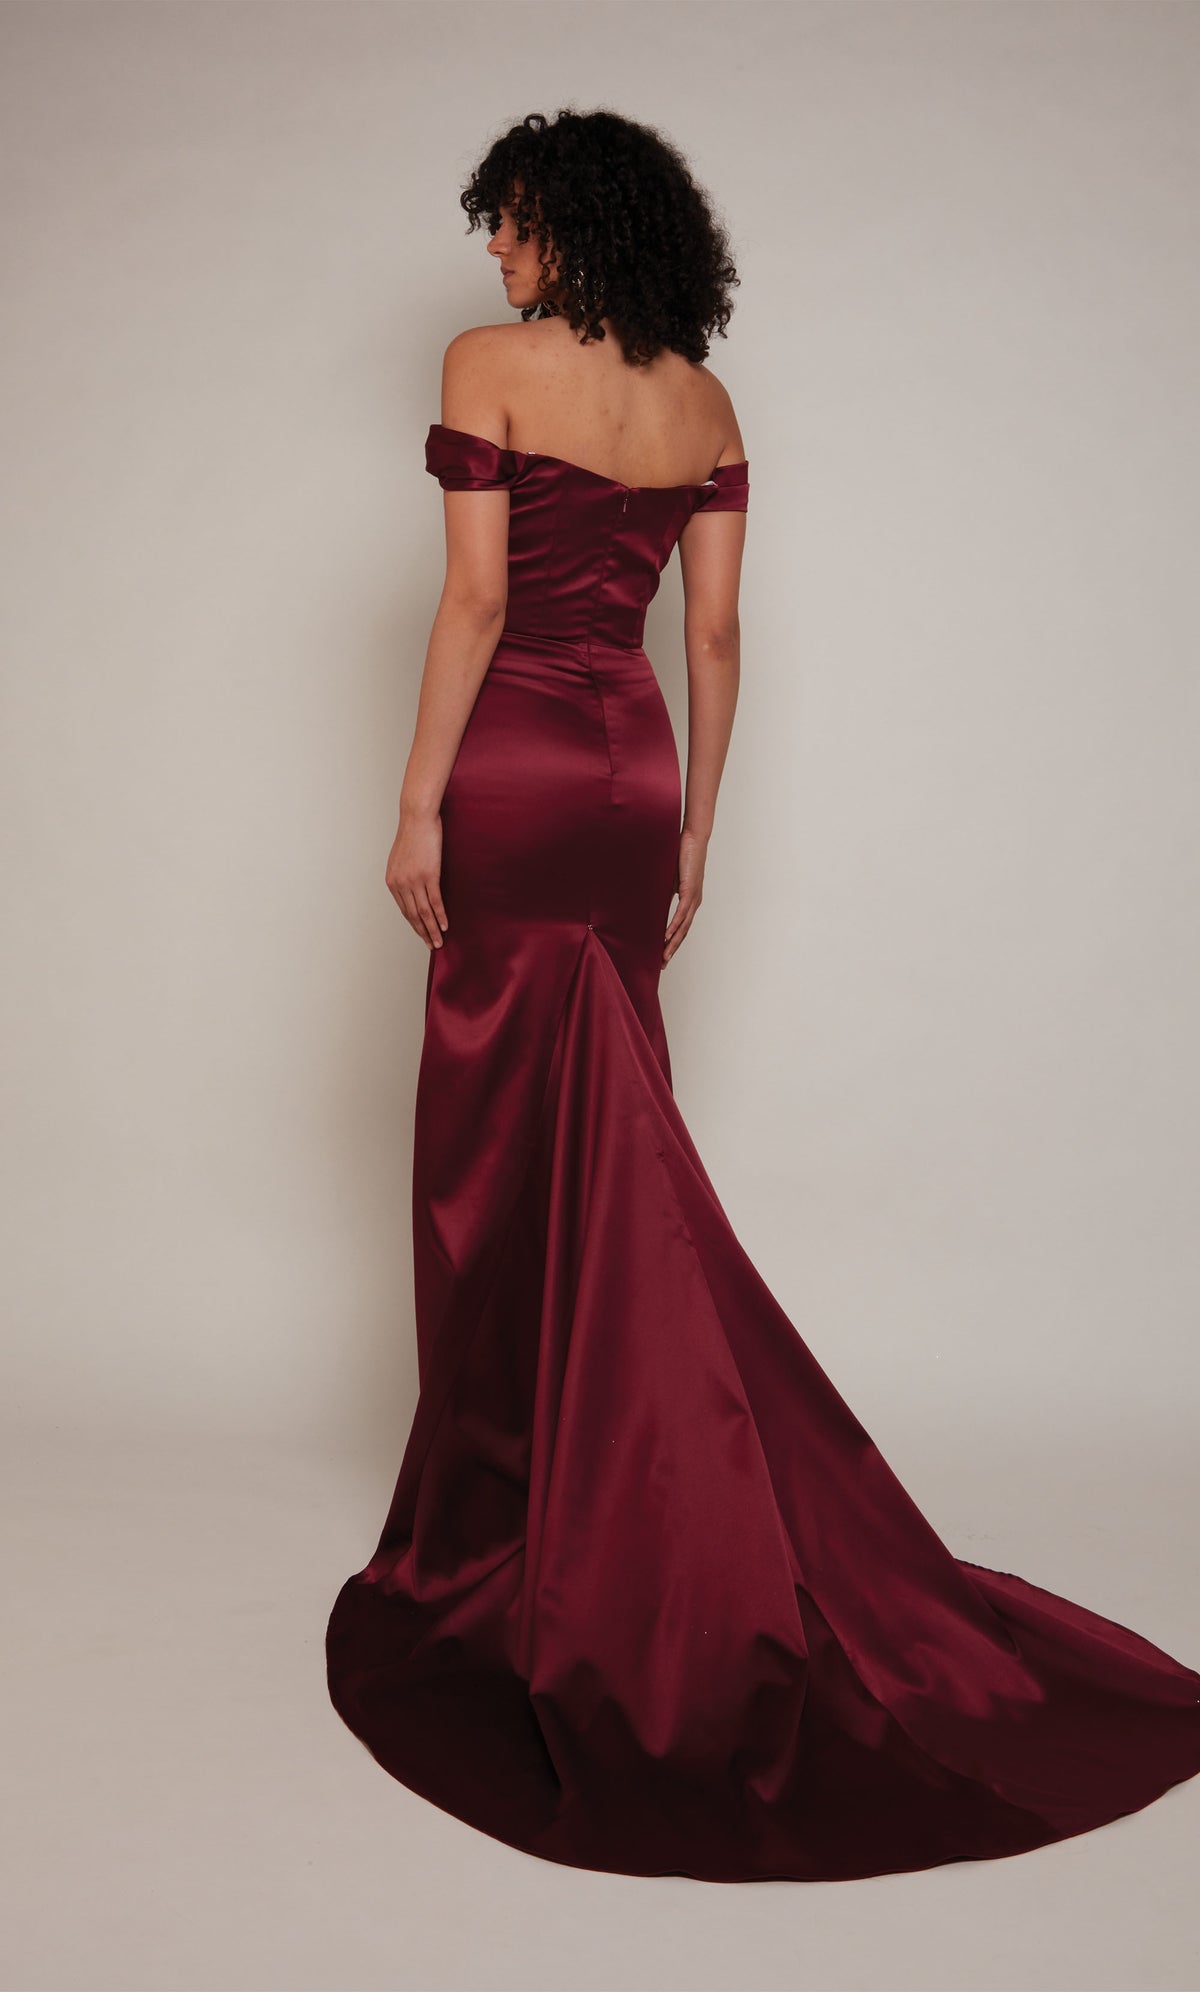 Simple wedding dress with an off the shoulder neckline, zip up back closure, and train in burgundy.